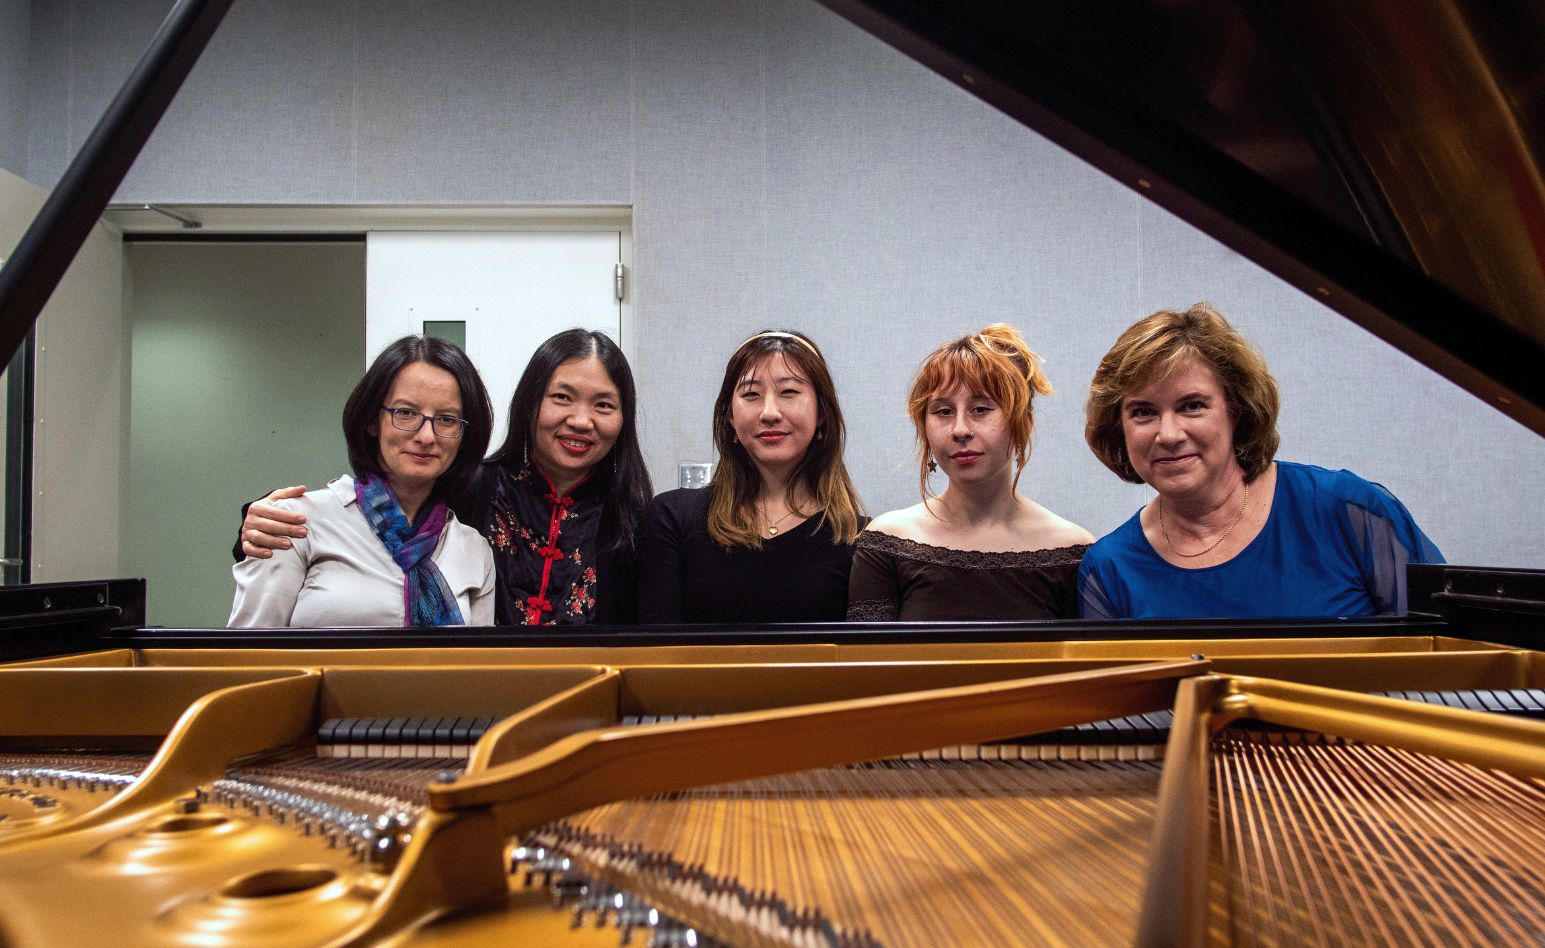 Five women pose behind the strings of a grand piano